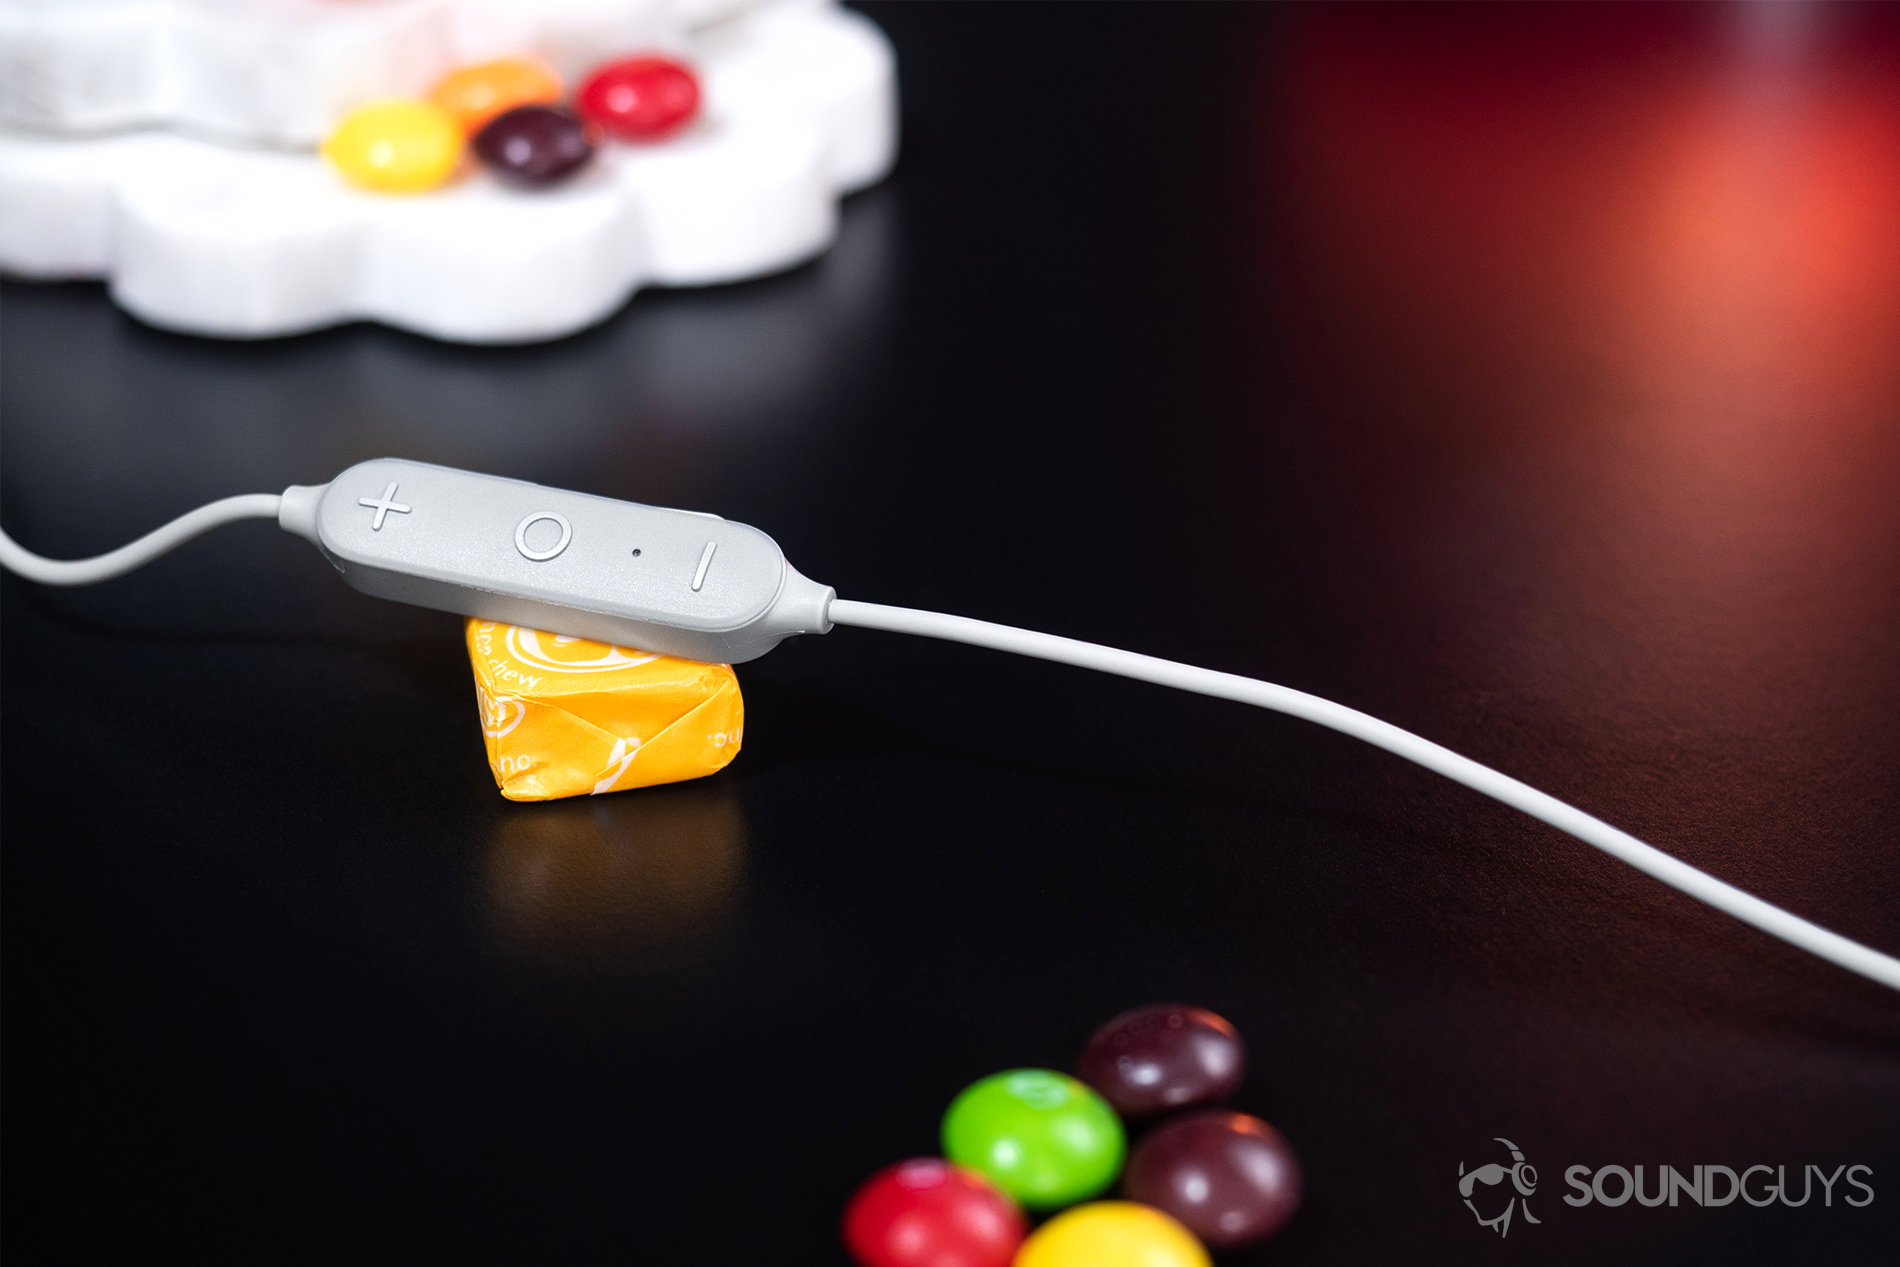 Aukey EP-B80: The integrated three button remote module resting on a yellow Starburst with Skittles scattered through the frame.